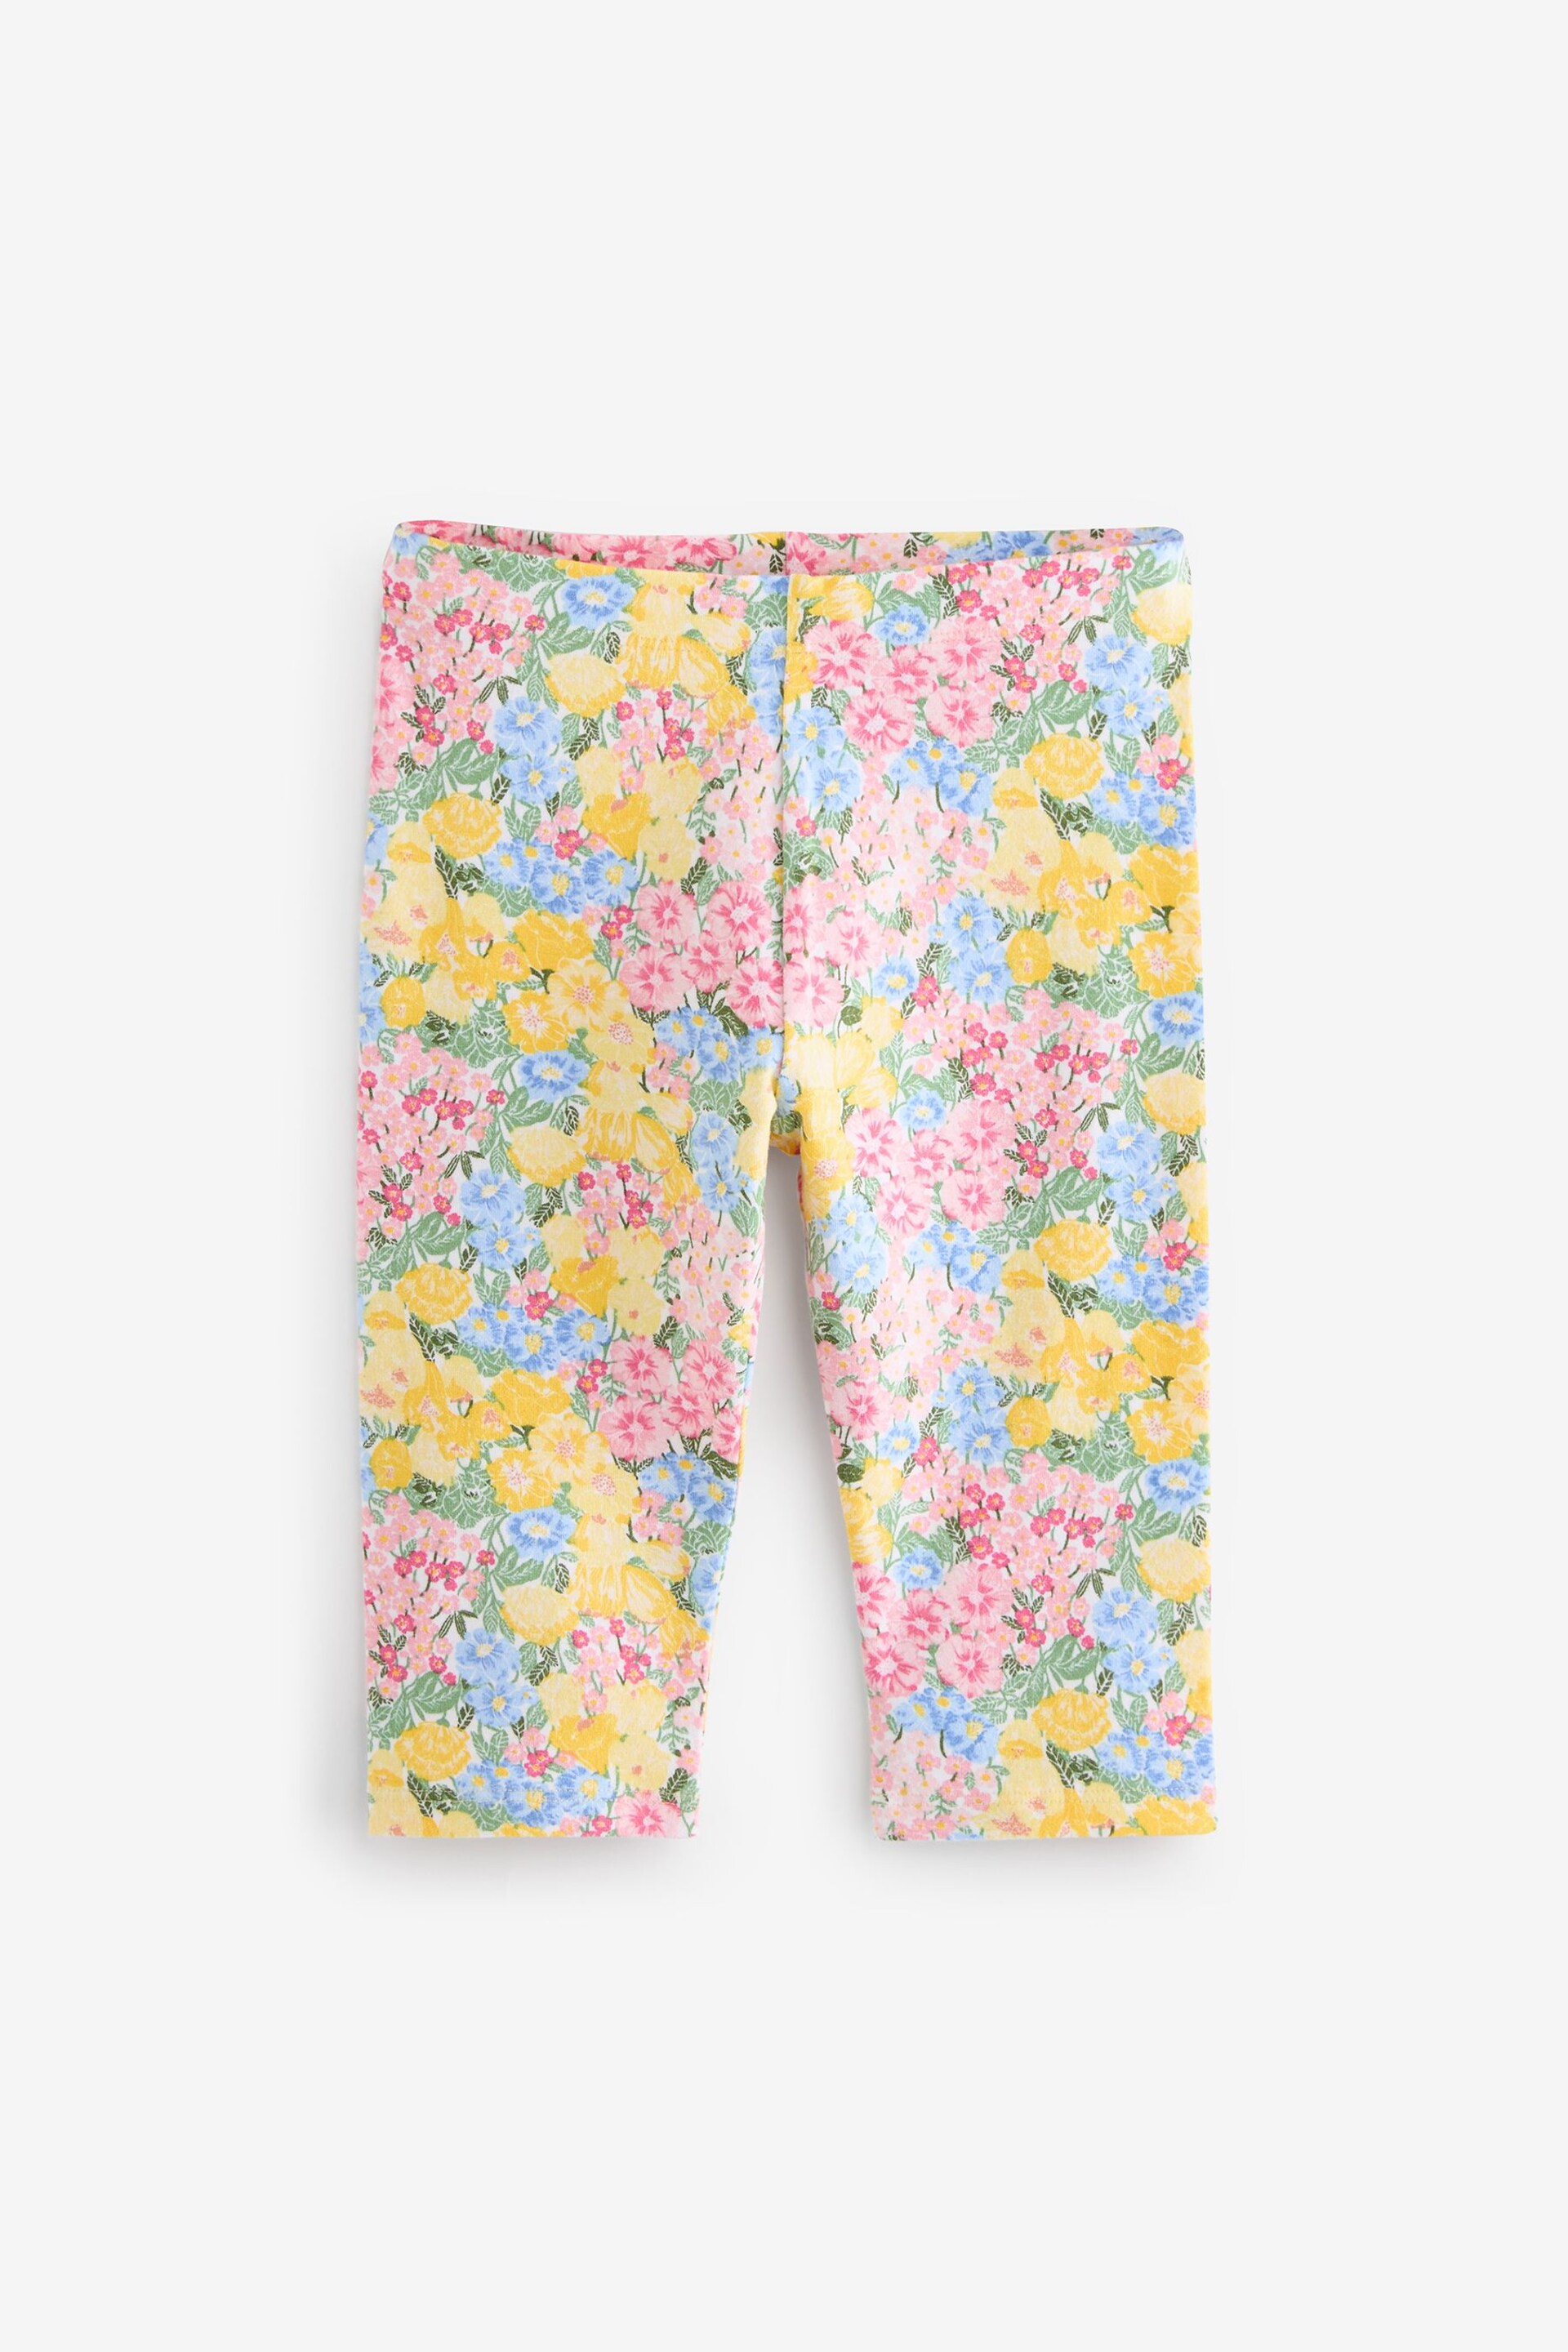 Pink/ Yellow Floral Print Cropped Leggings (3-16yrs) - Image 6 of 8